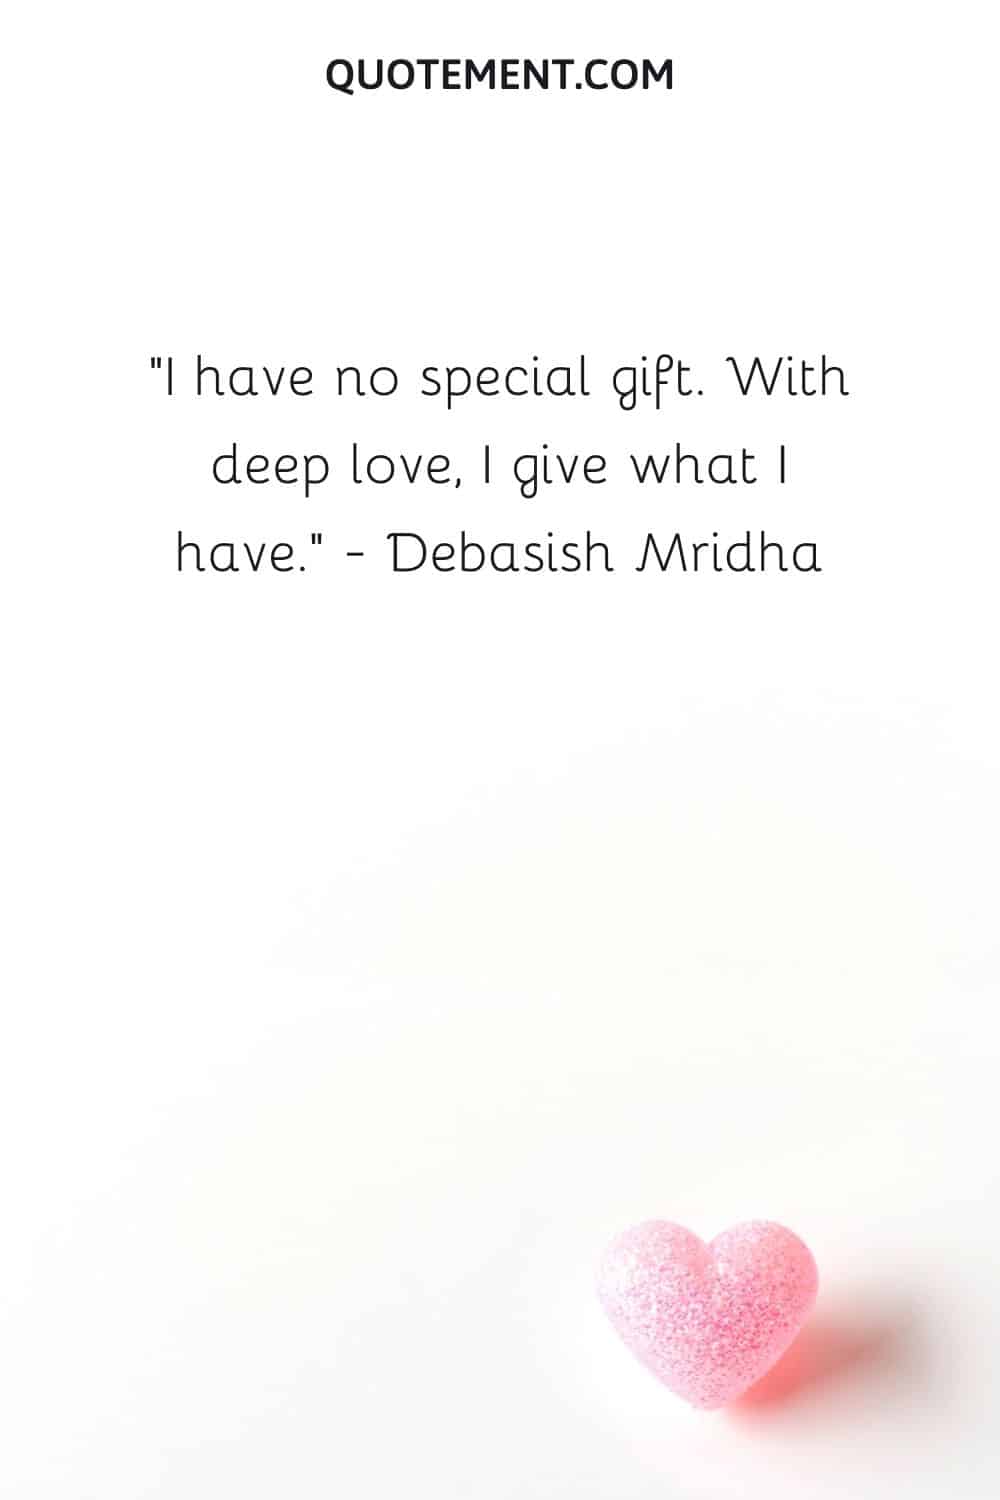 I have no special gift. With deep love, I give what I have.